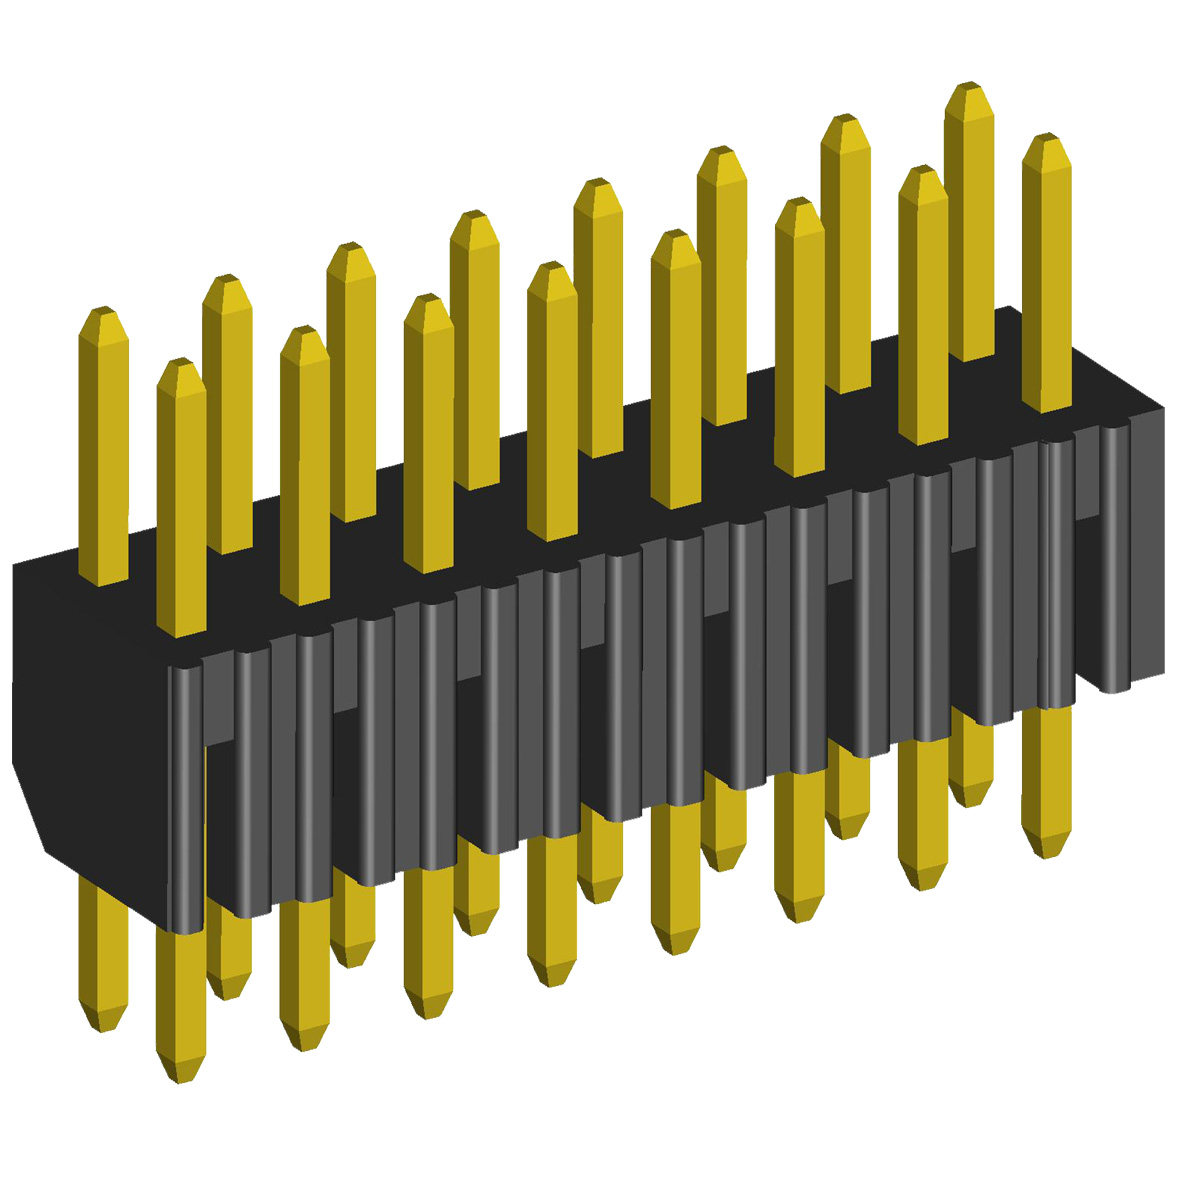 Open pin headers and Sockets for its, PCB/PCB (Board-to-Board) types with pitch 2,00x2,00 mm and sockets for them